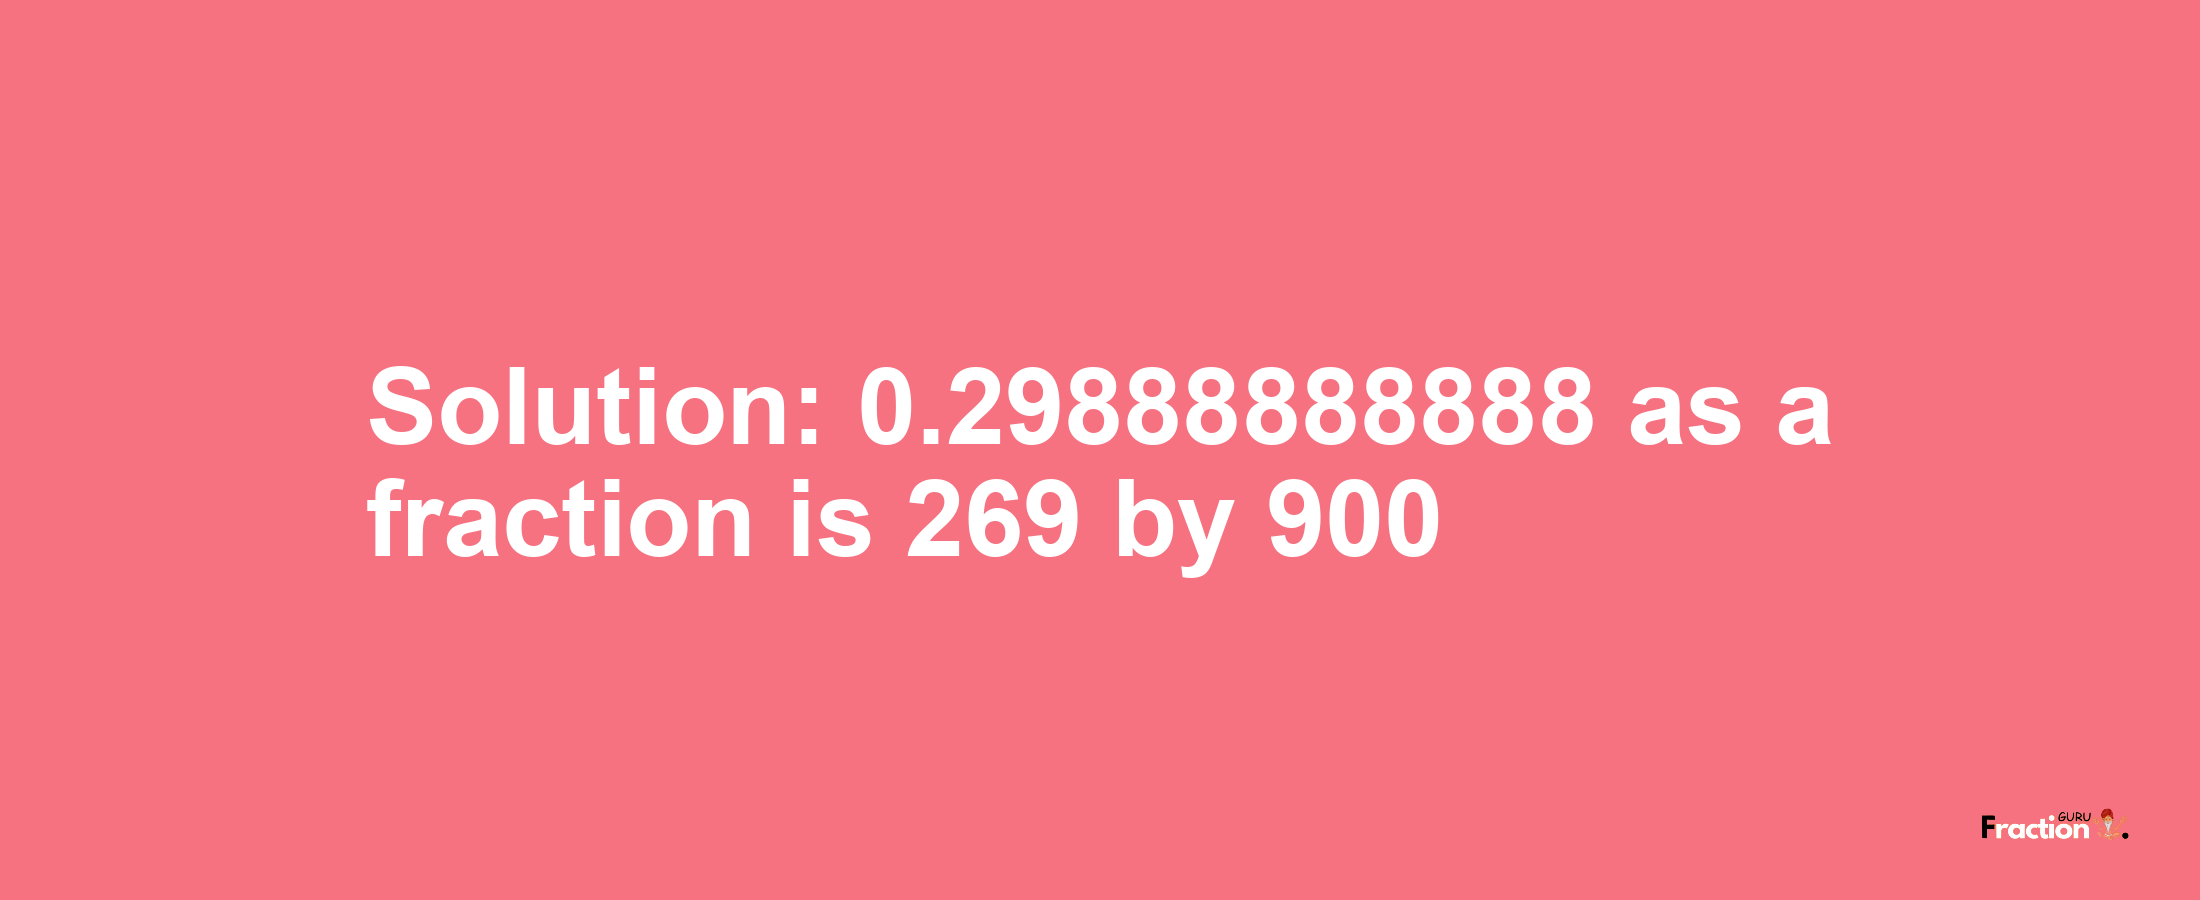 Solution:0.29888888888 as a fraction is 269/900